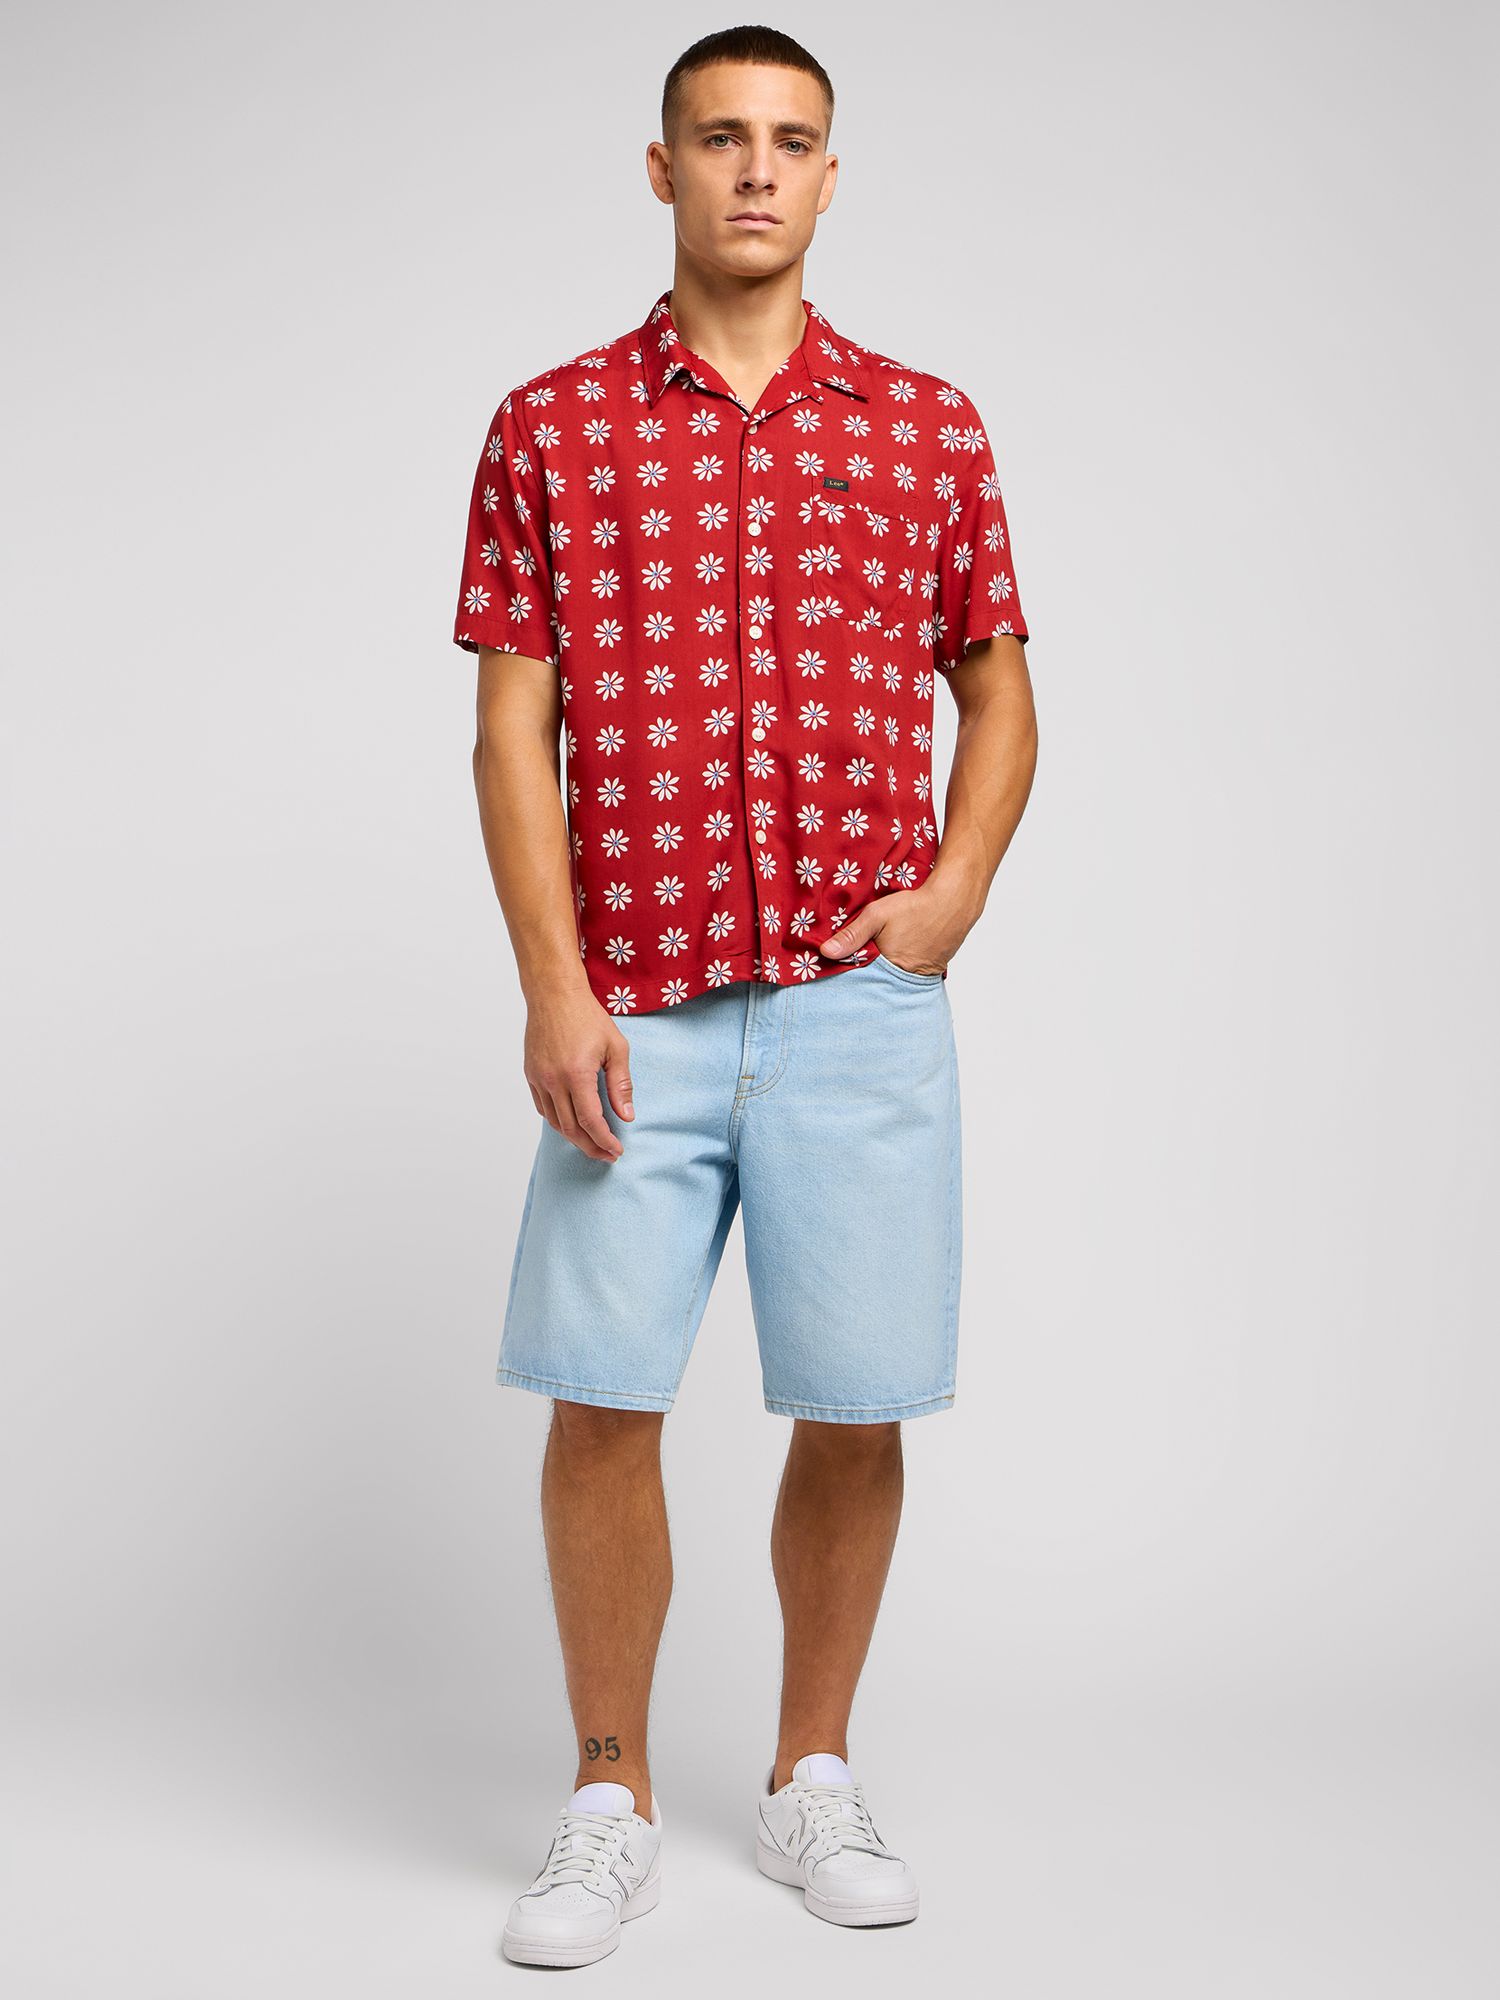 Buy Lee Classic Resort Shirt,  Red/White Online at johnlewis.com